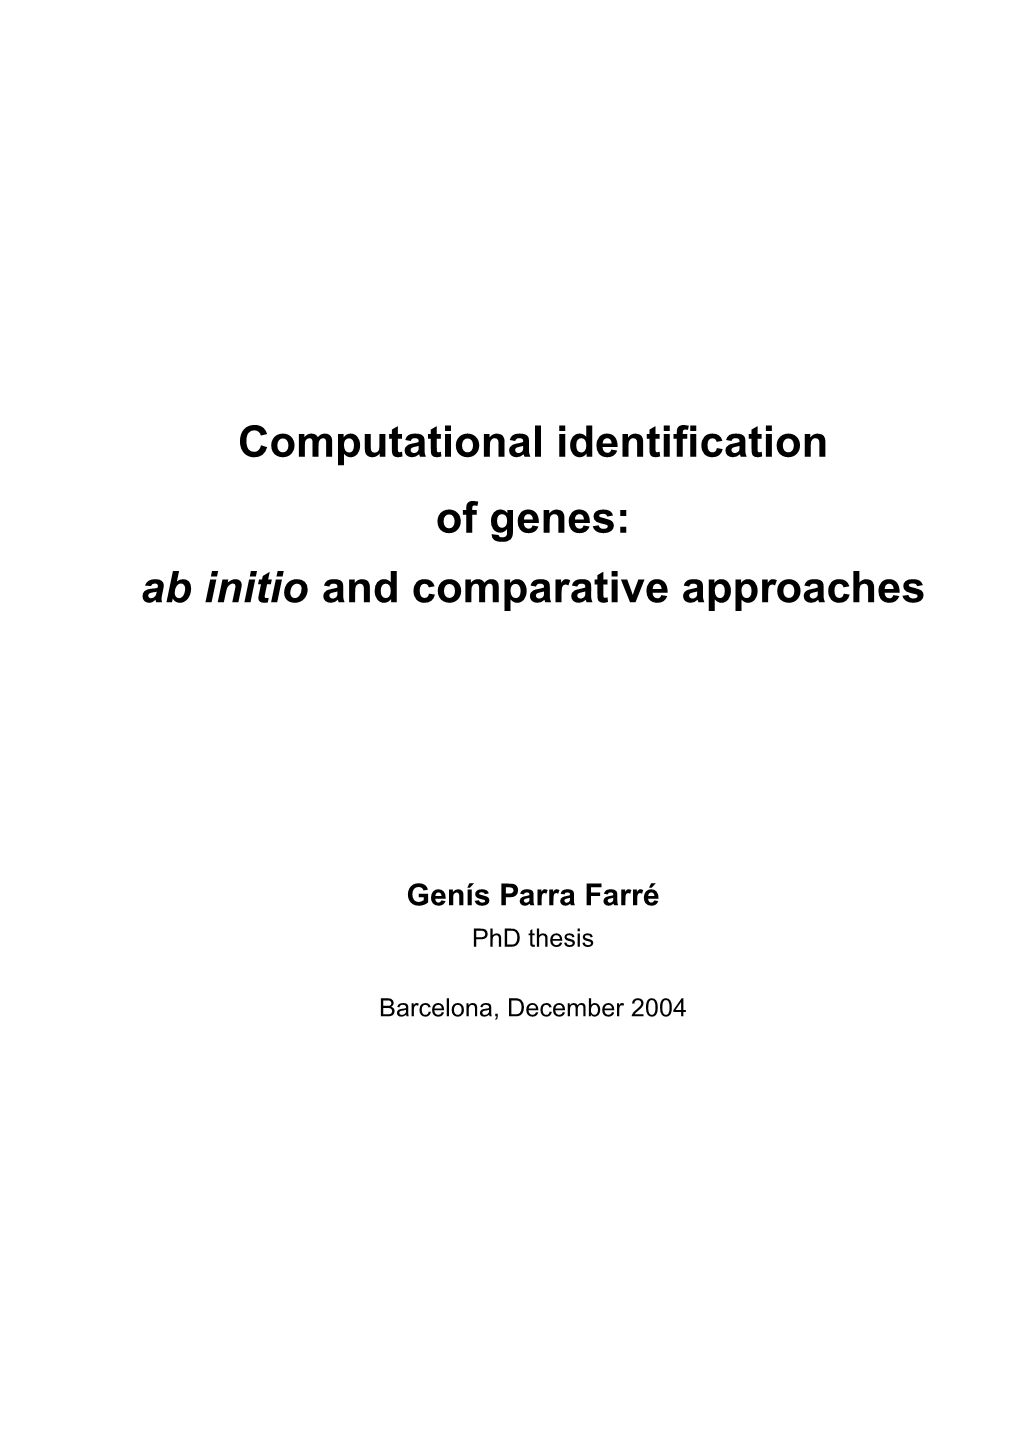 Computational Identification of Genes: Ab Initio and Comparative Approaches